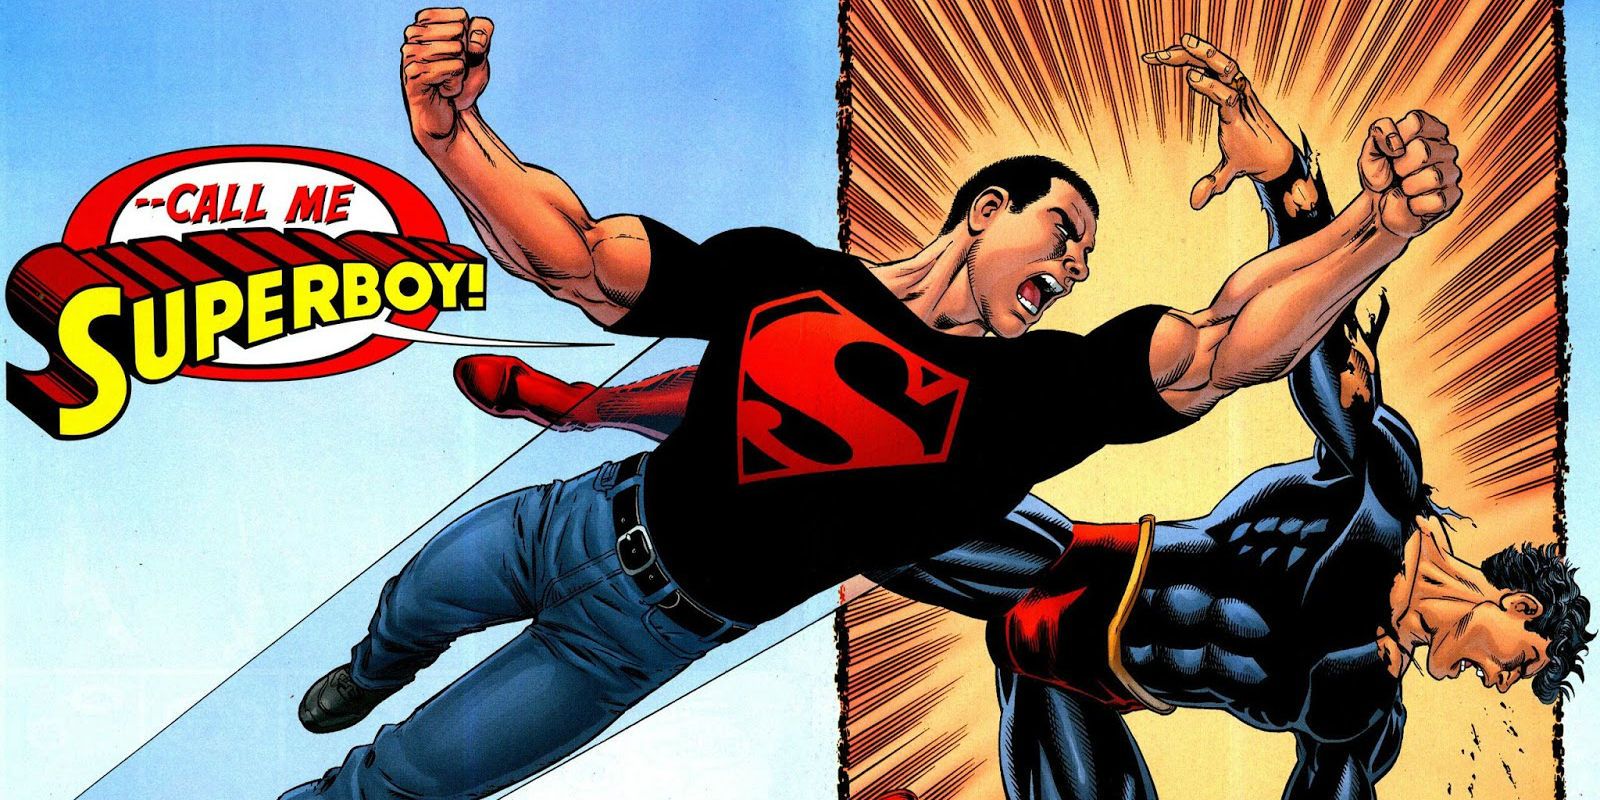 Superboy from DC Comics